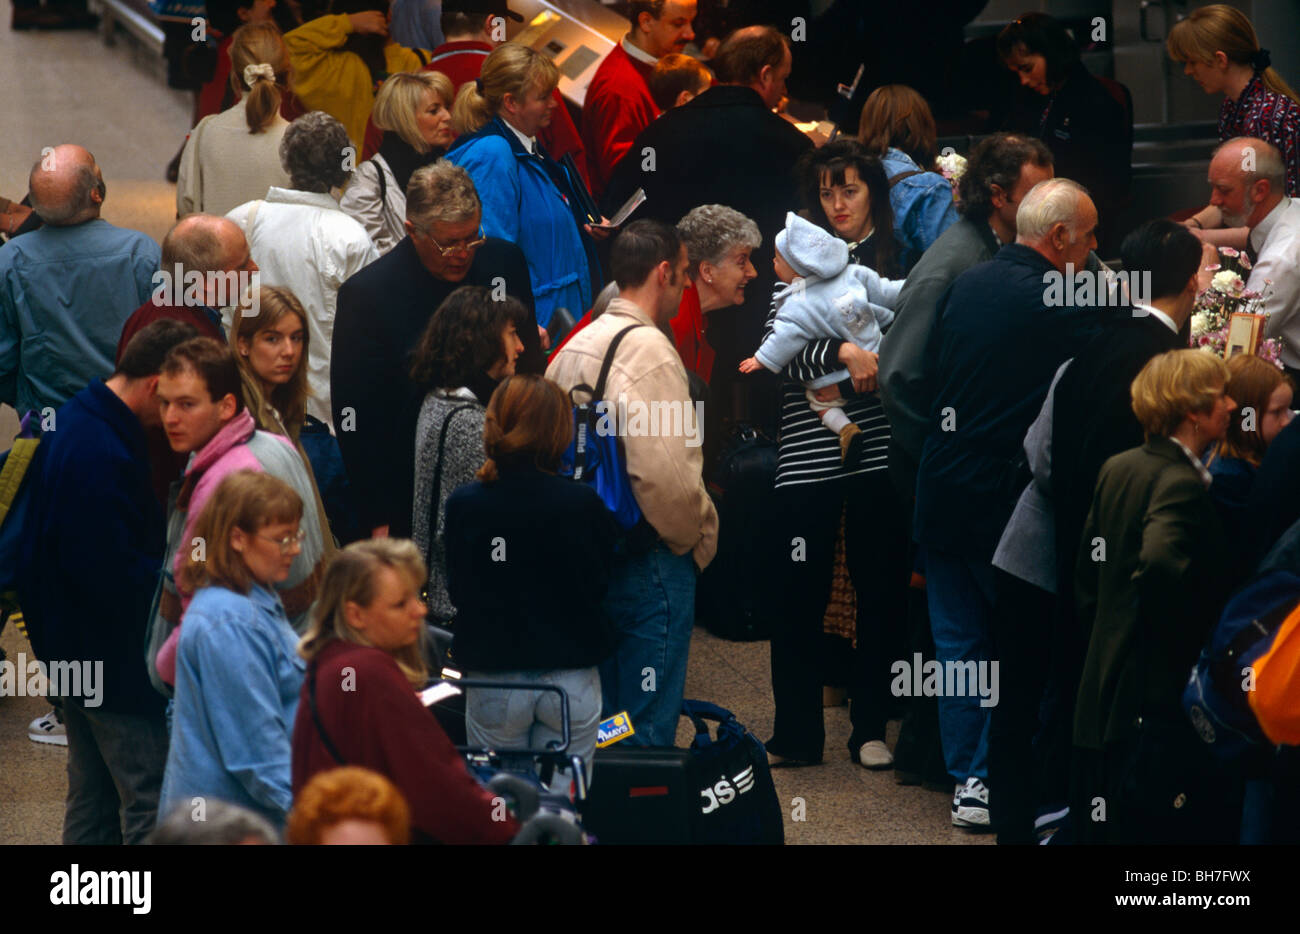 Crowds wait to check-in during a busy holiday weekend at Glasgow airport. Stock Photo